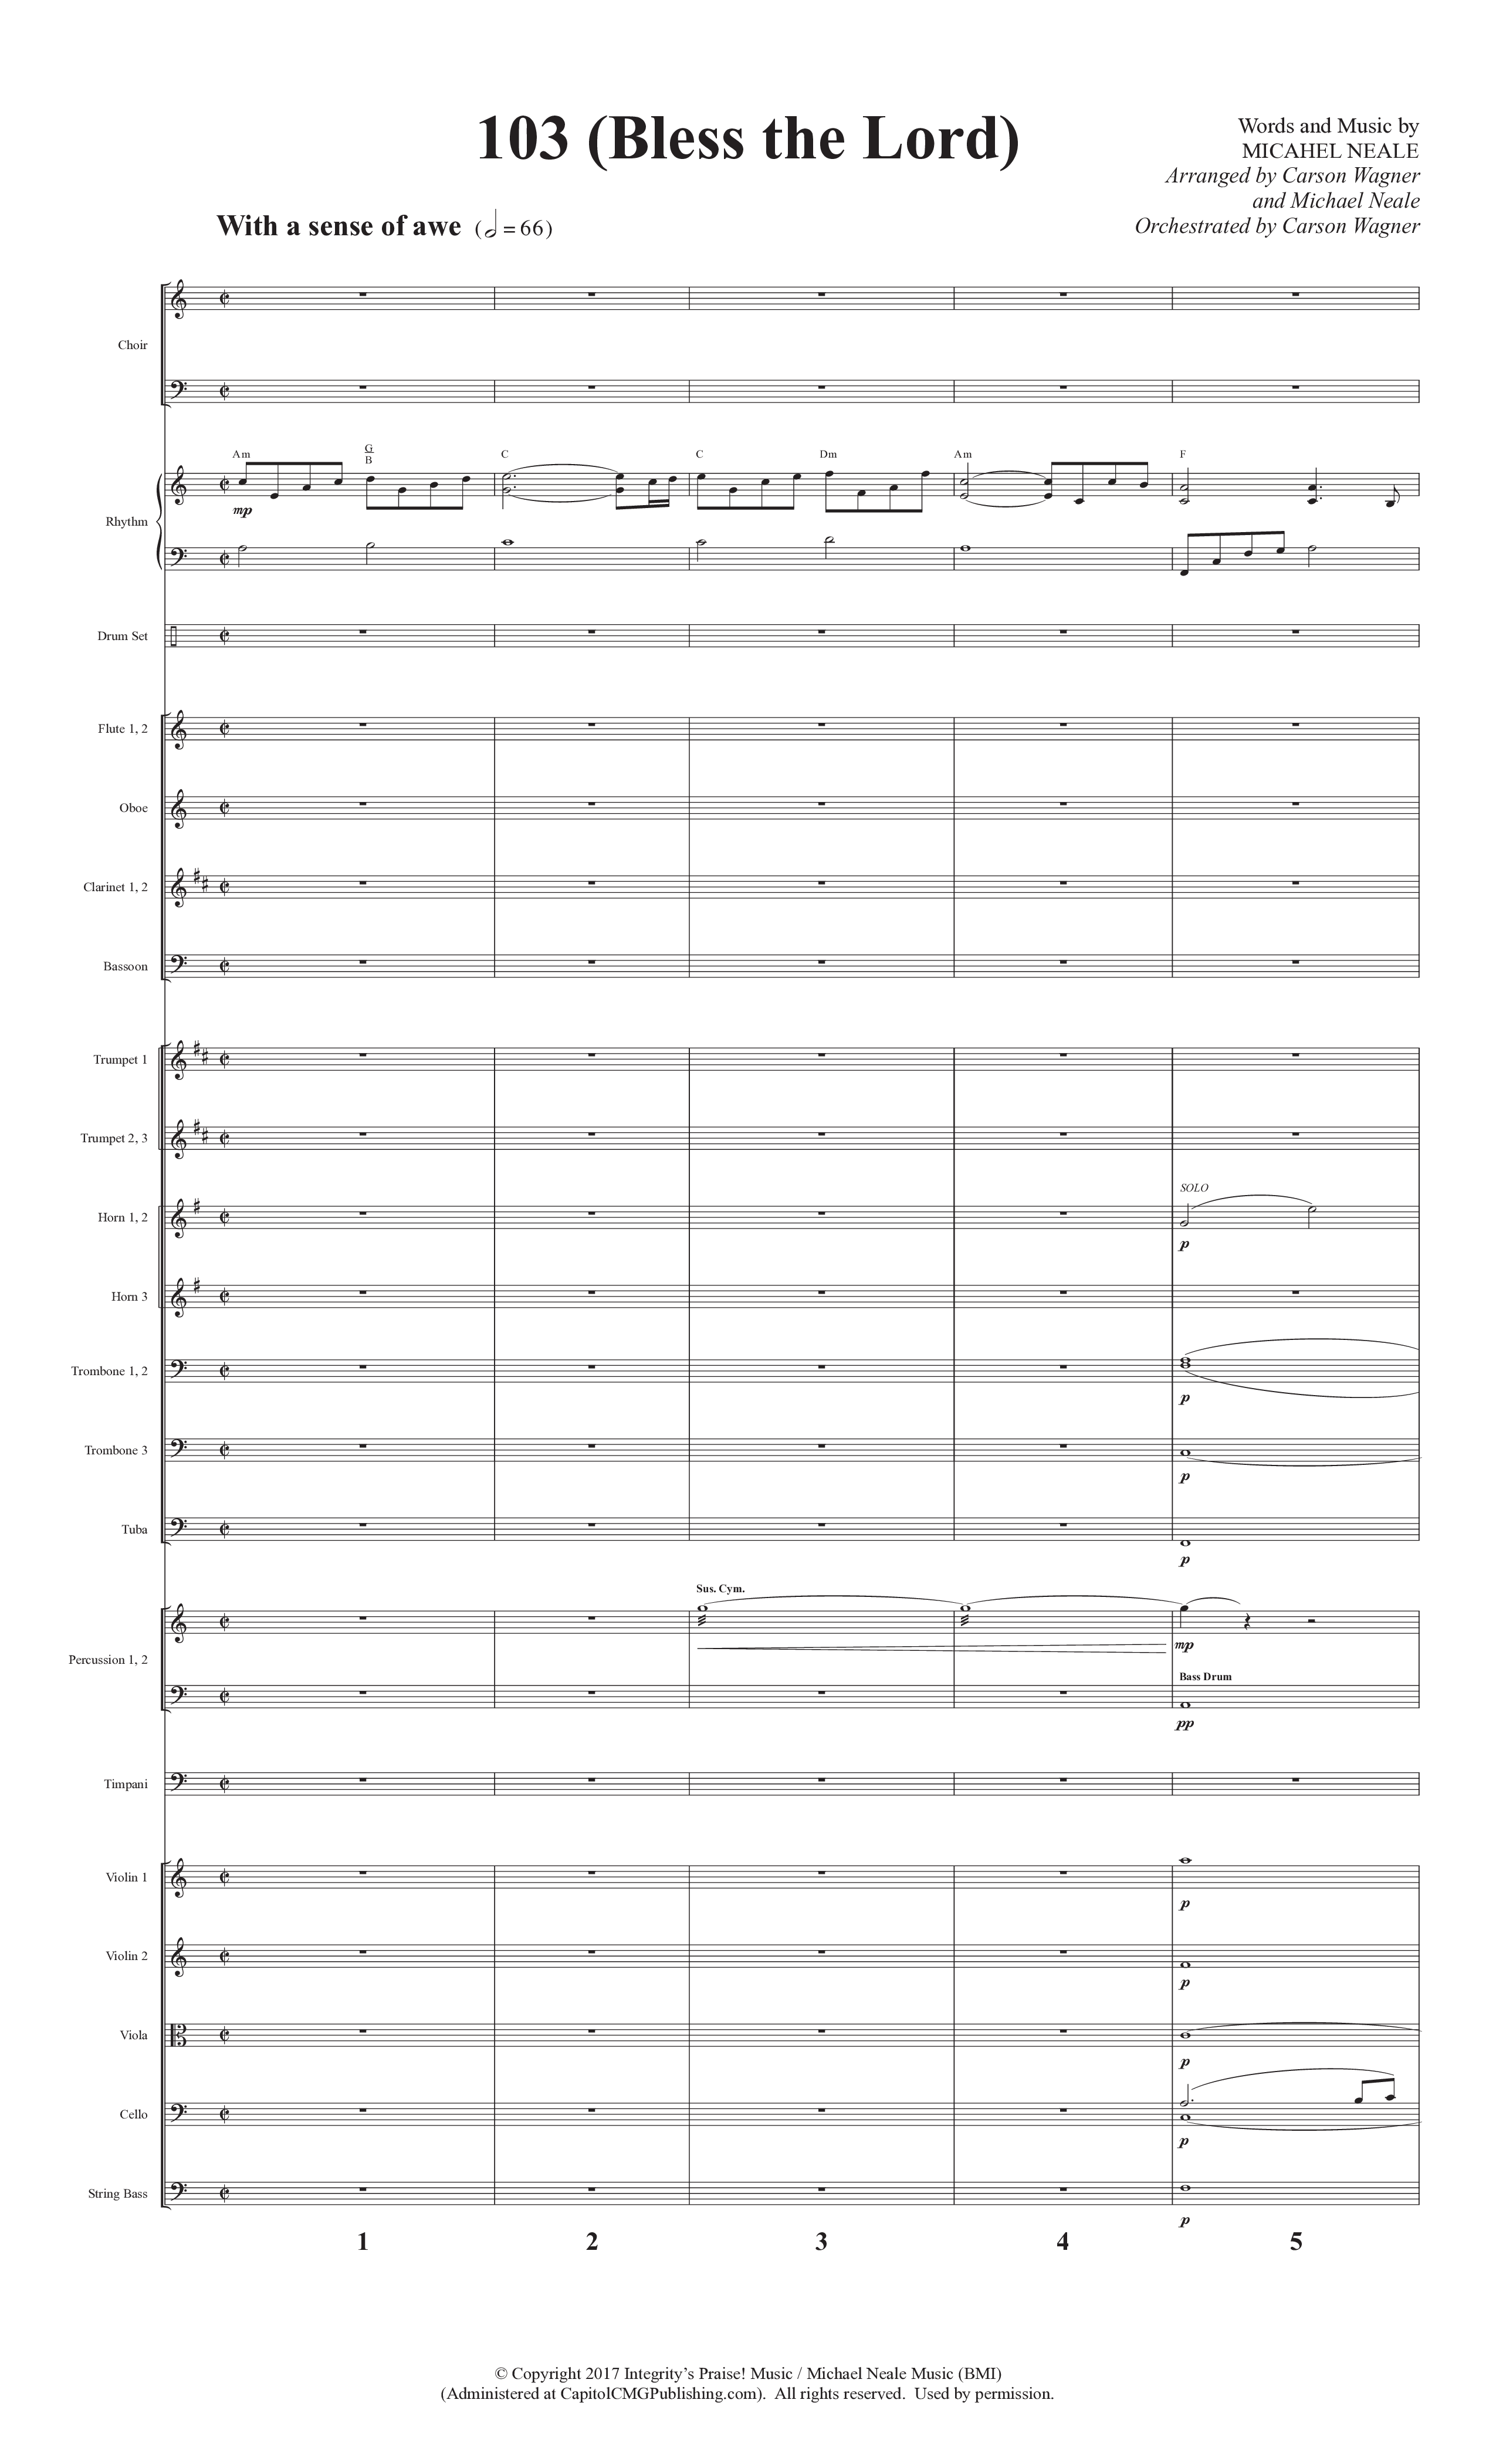 103 (Bless The Lord) (Choral Anthem SATB) Conductor's Score (Prestonwood Worship / Prestonwood Choir / Arr. Michael Neale / Orch. Carson Wagner)